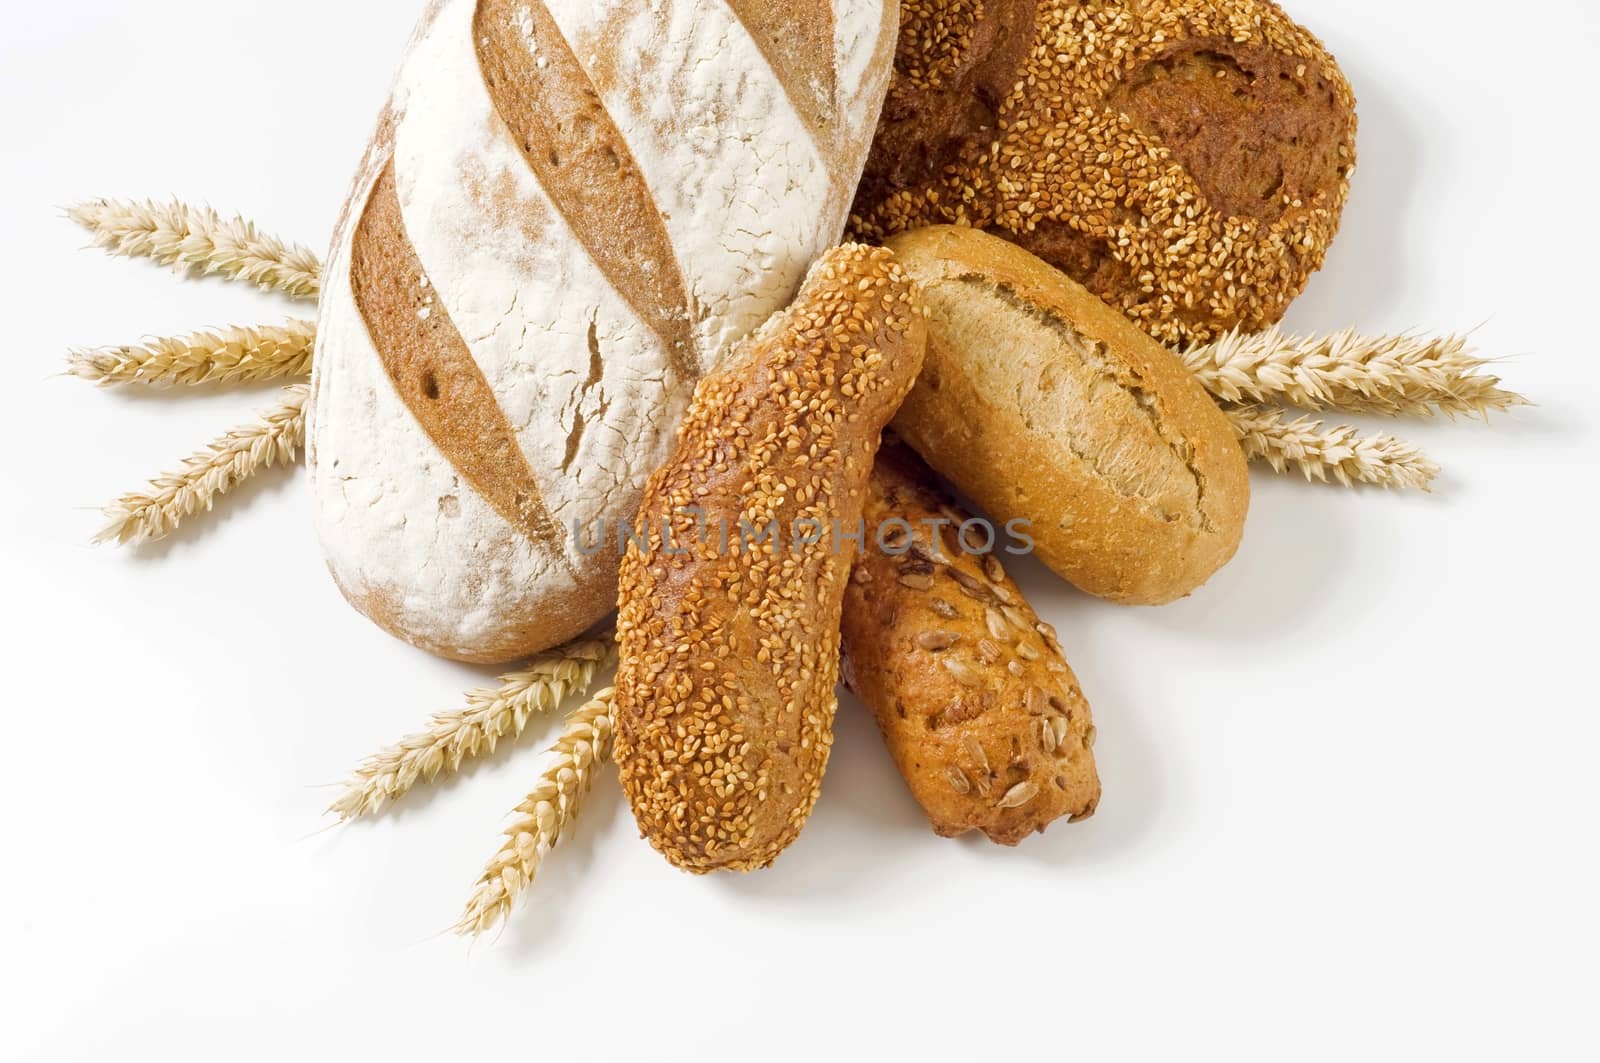 Various types of bread and rolls - studio